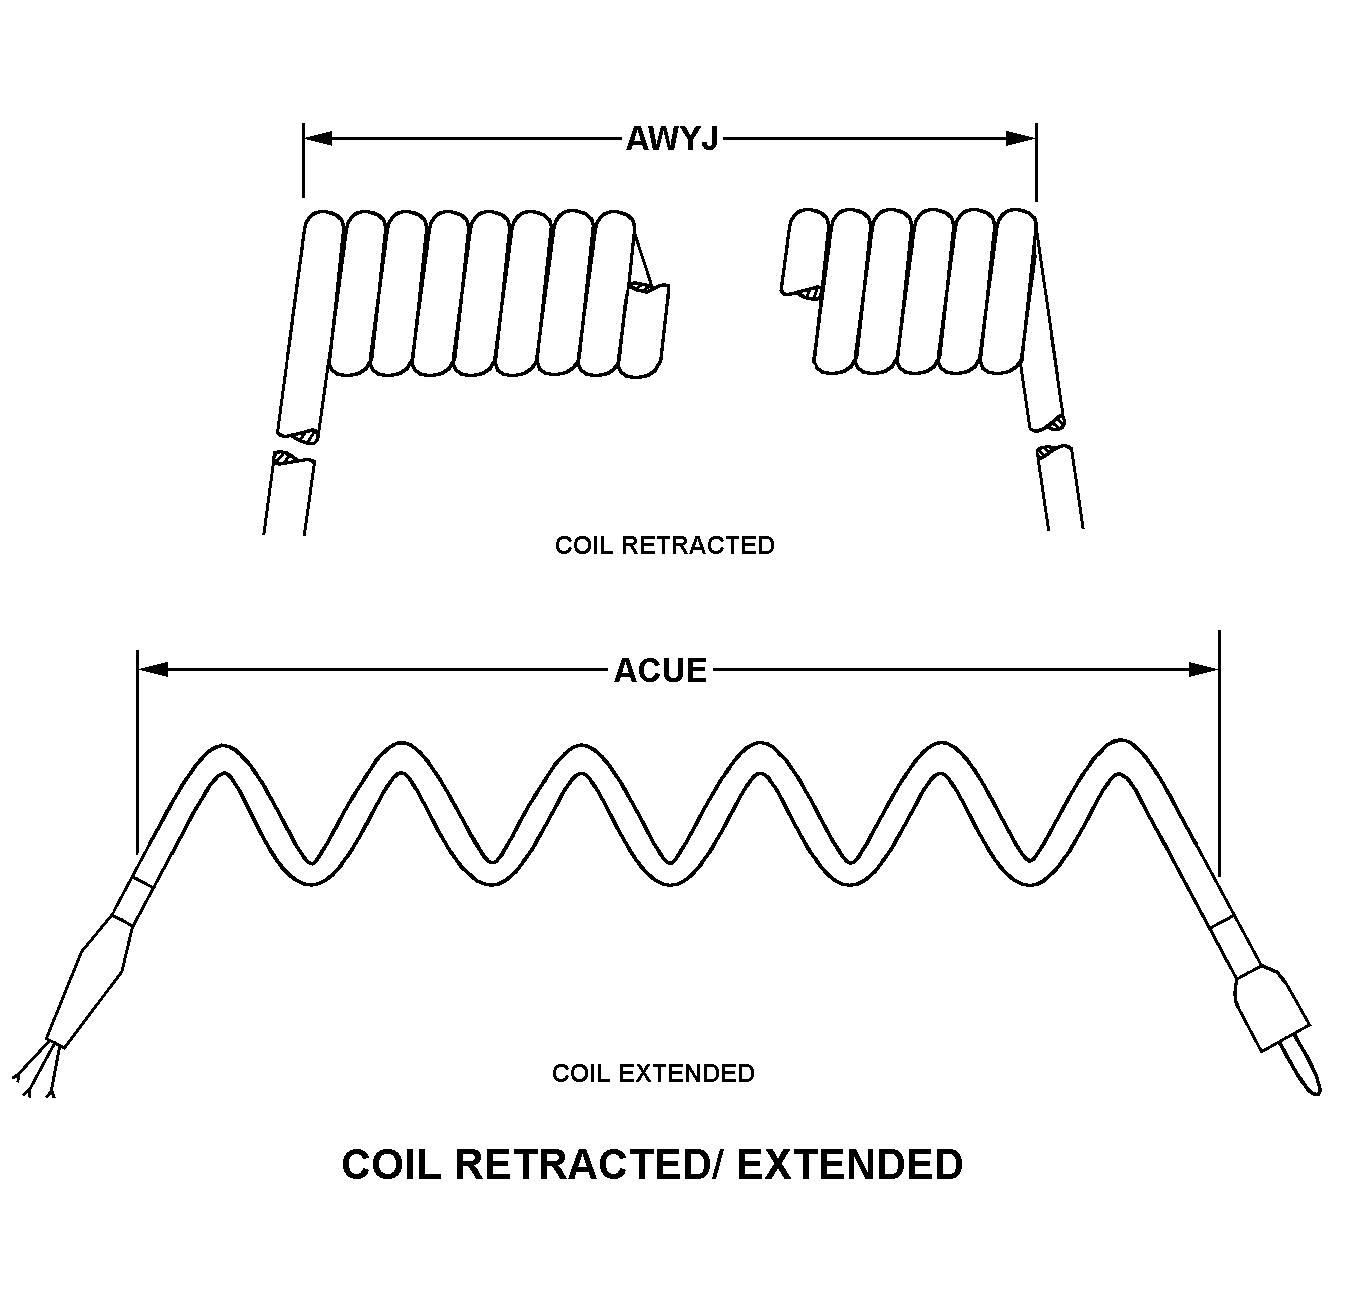 COIL RETRACTED/EXTENDED style nsn 6150-01-511-1928